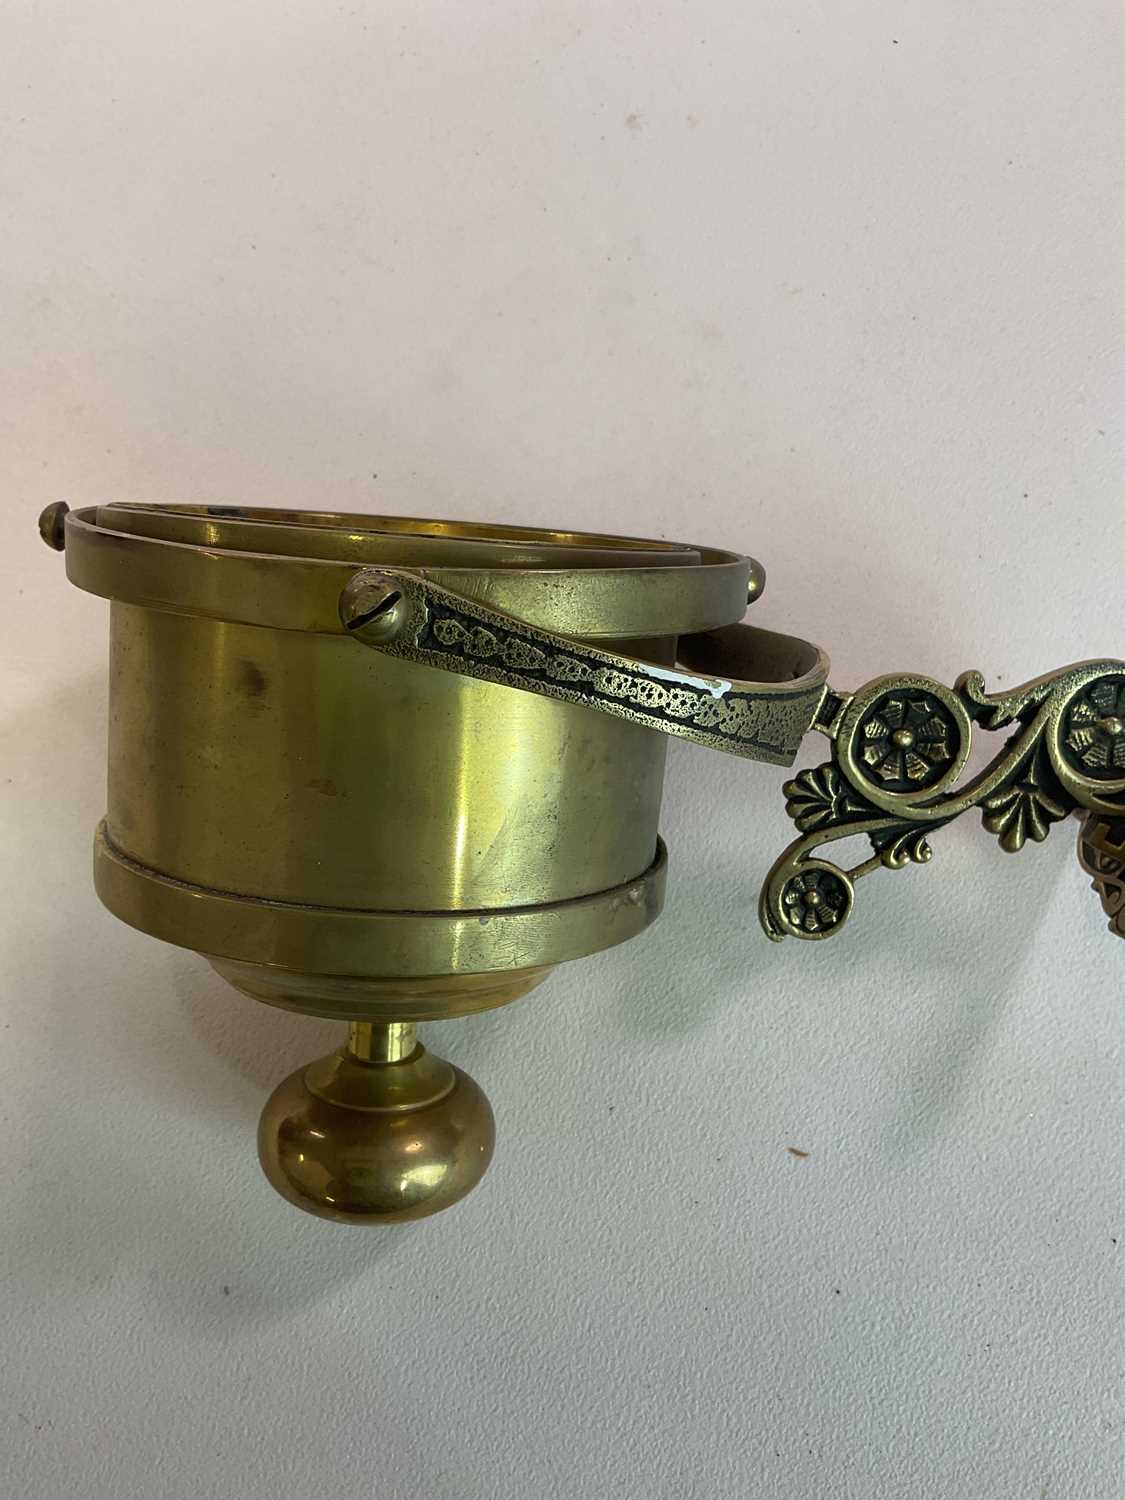 A counter weight cantilever ship's brass candle holder designed to swivel and stay level with the - Image 5 of 5